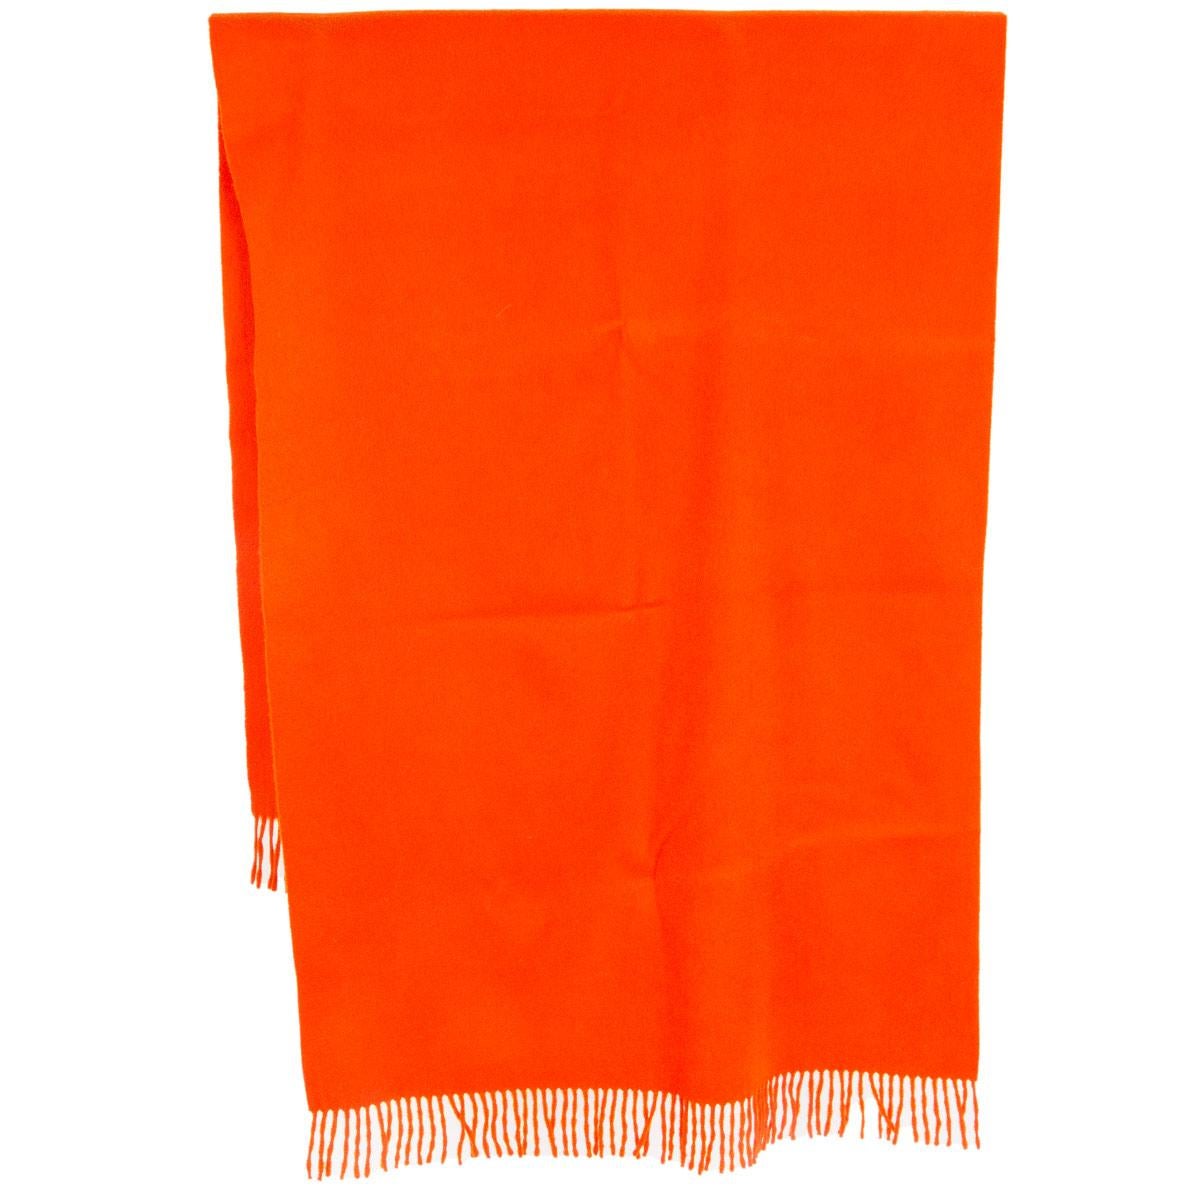 Hermès fringe shawl in pumpkin orange cashmere (100%). Has been worn once and is in excellent condition. 

Width 70cm (27.3in)
Length 180cm (70.2in)